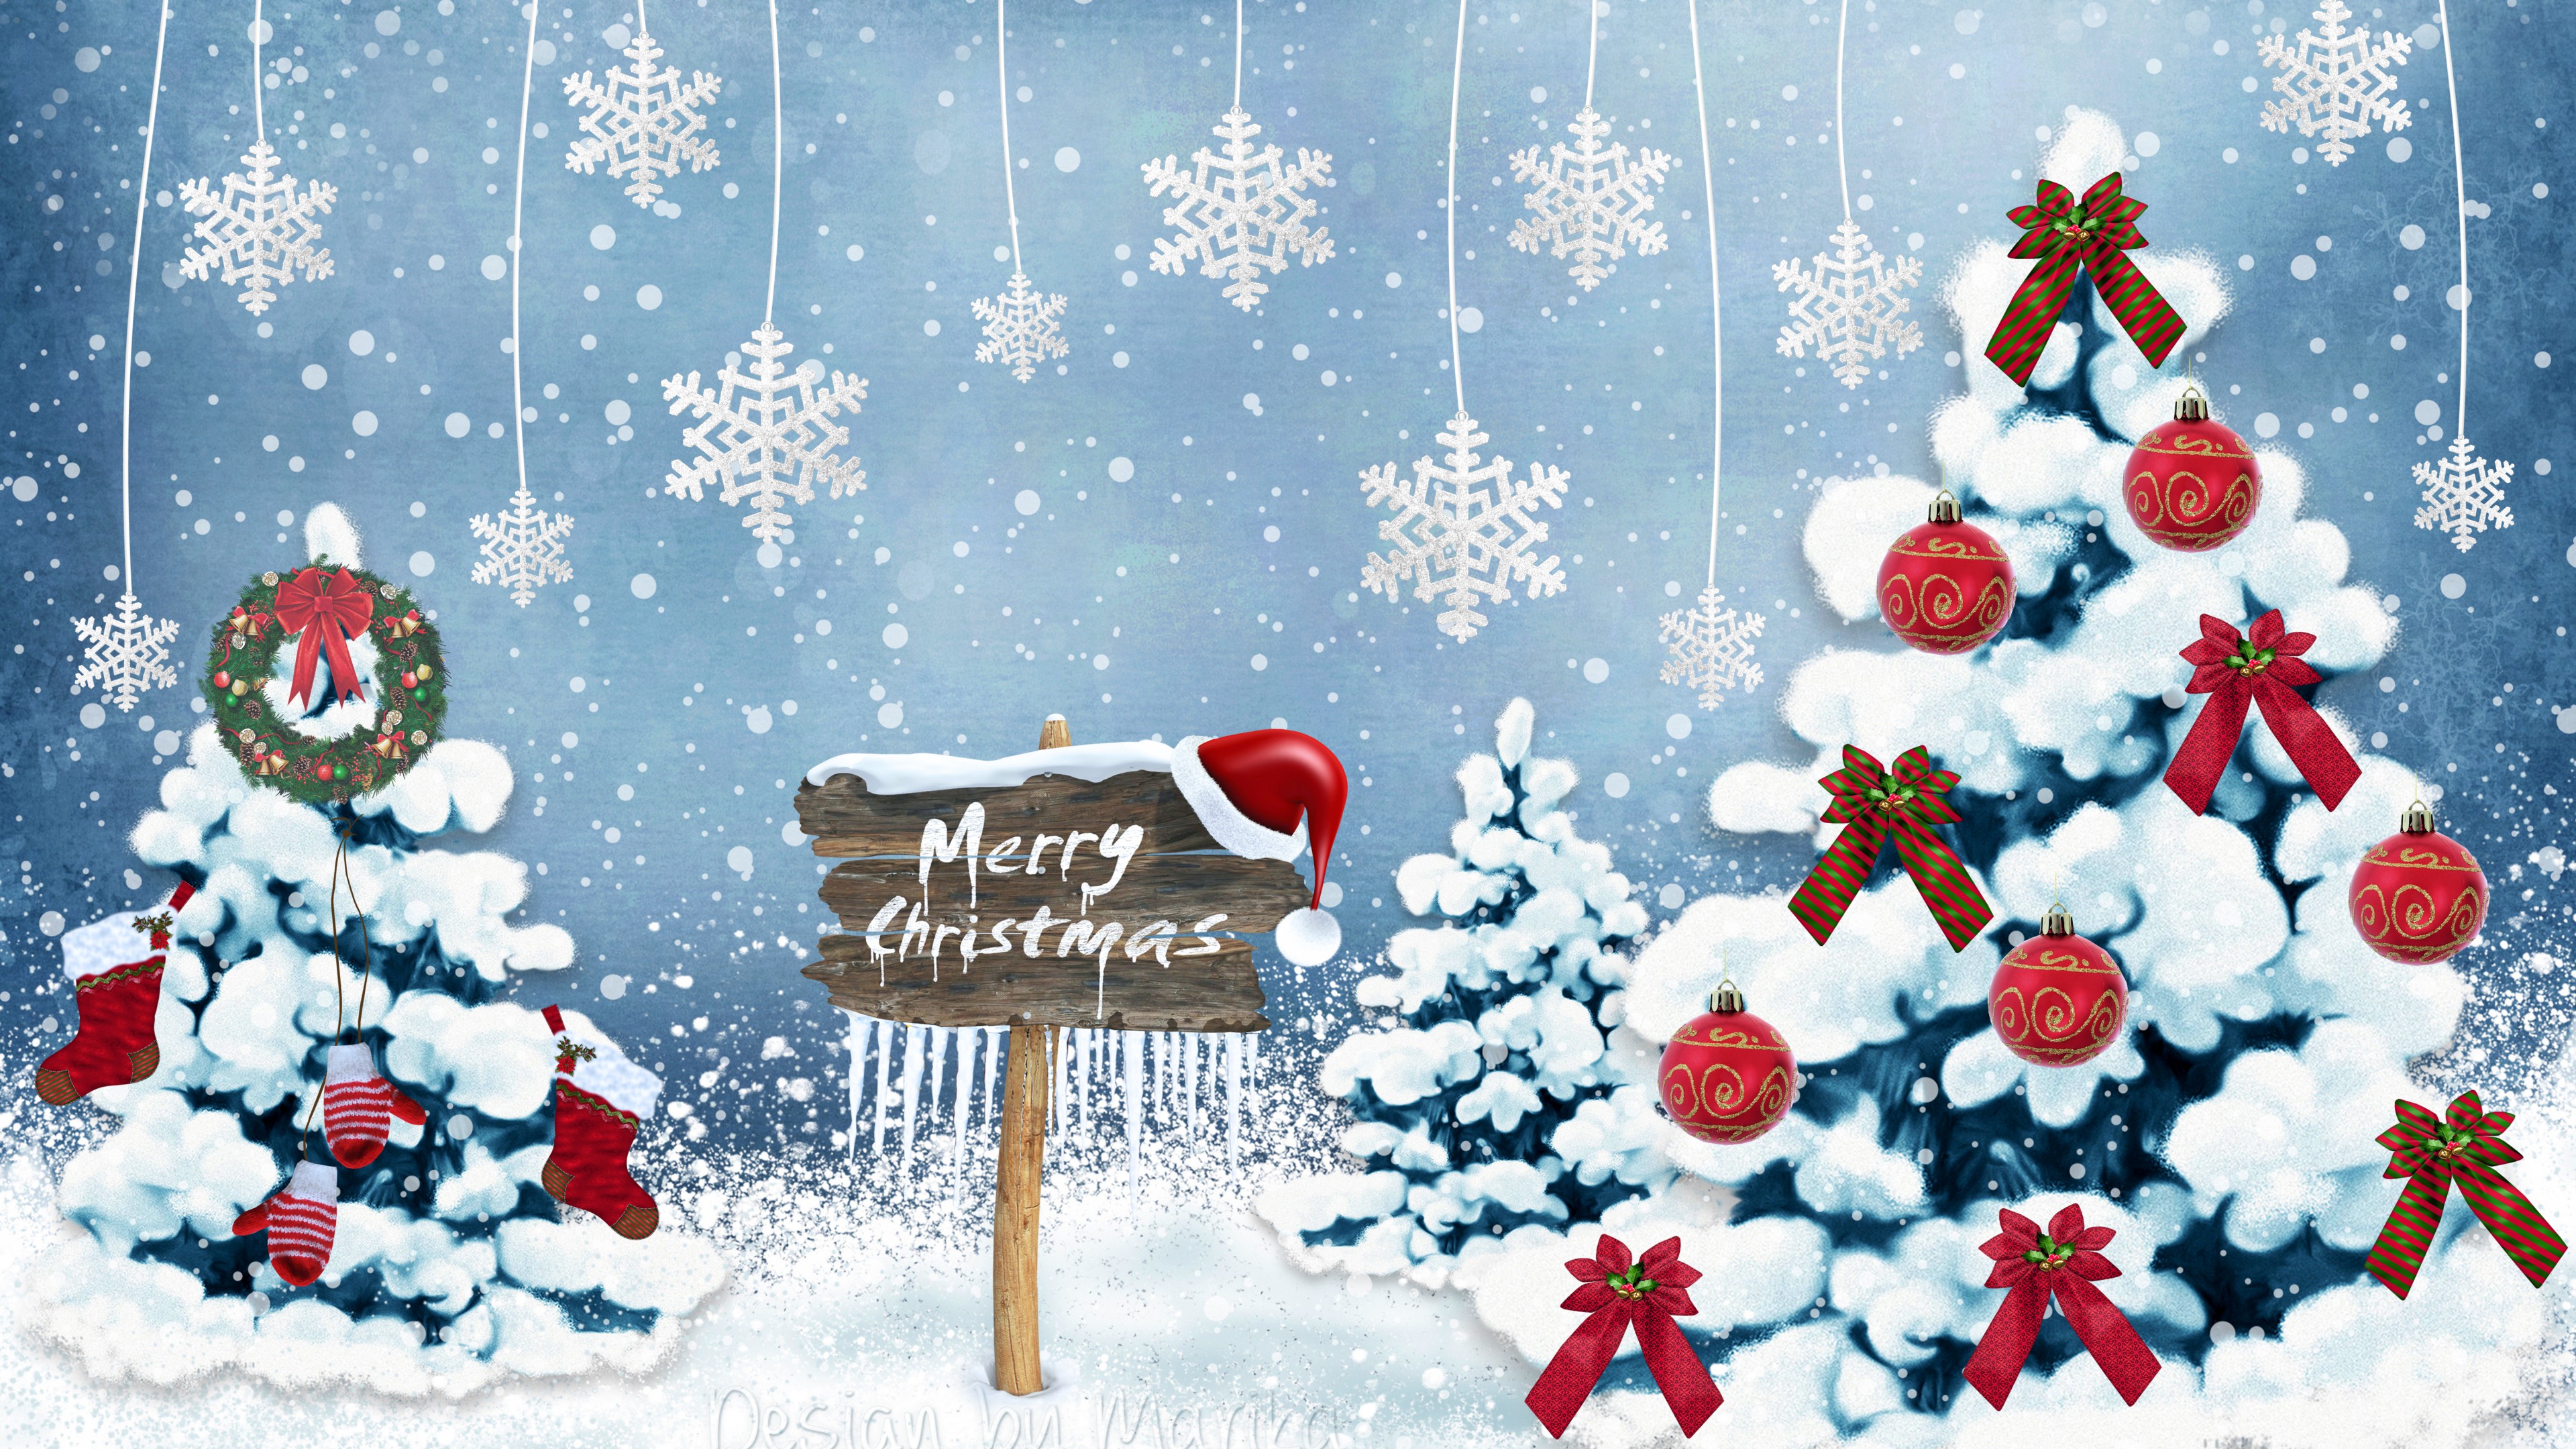 Merry Christmas HD Wallpaper For